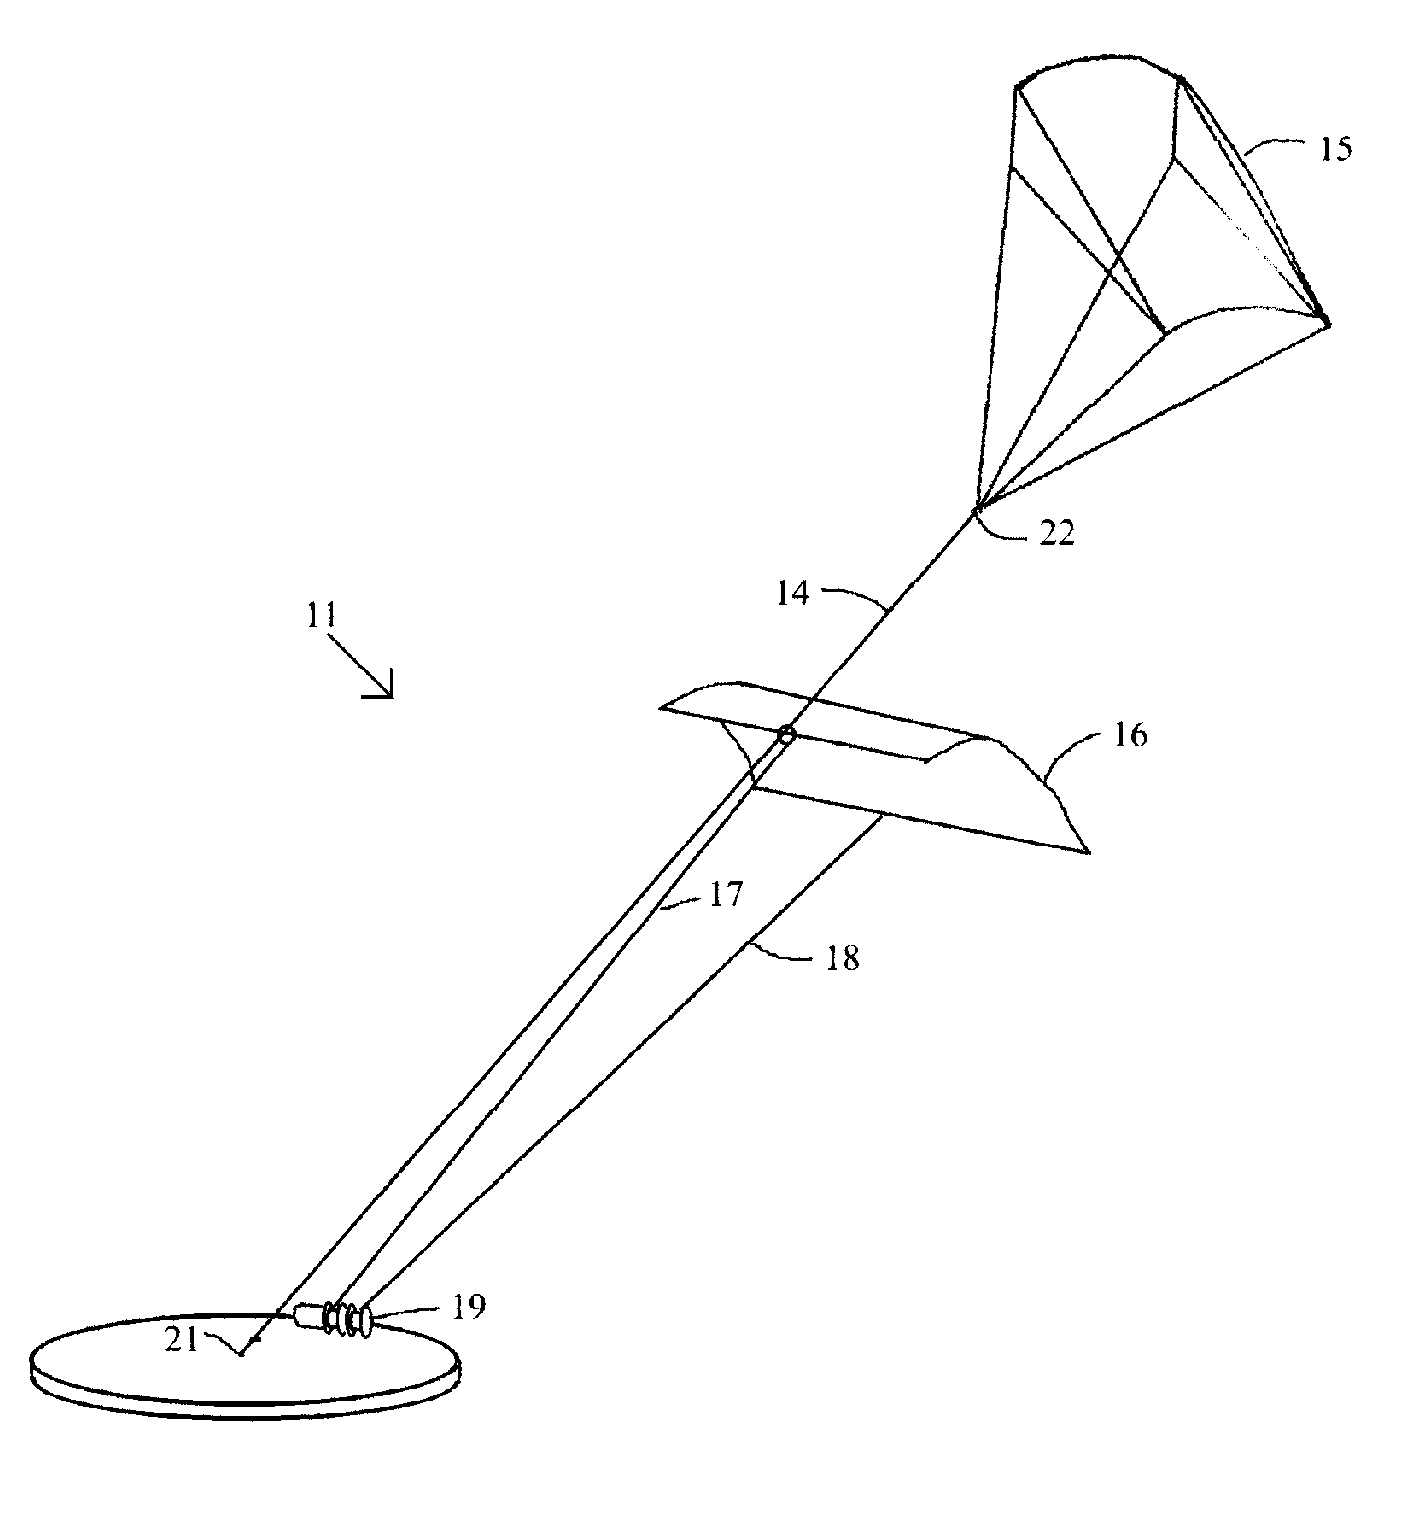 Aerialwind power generation system and method